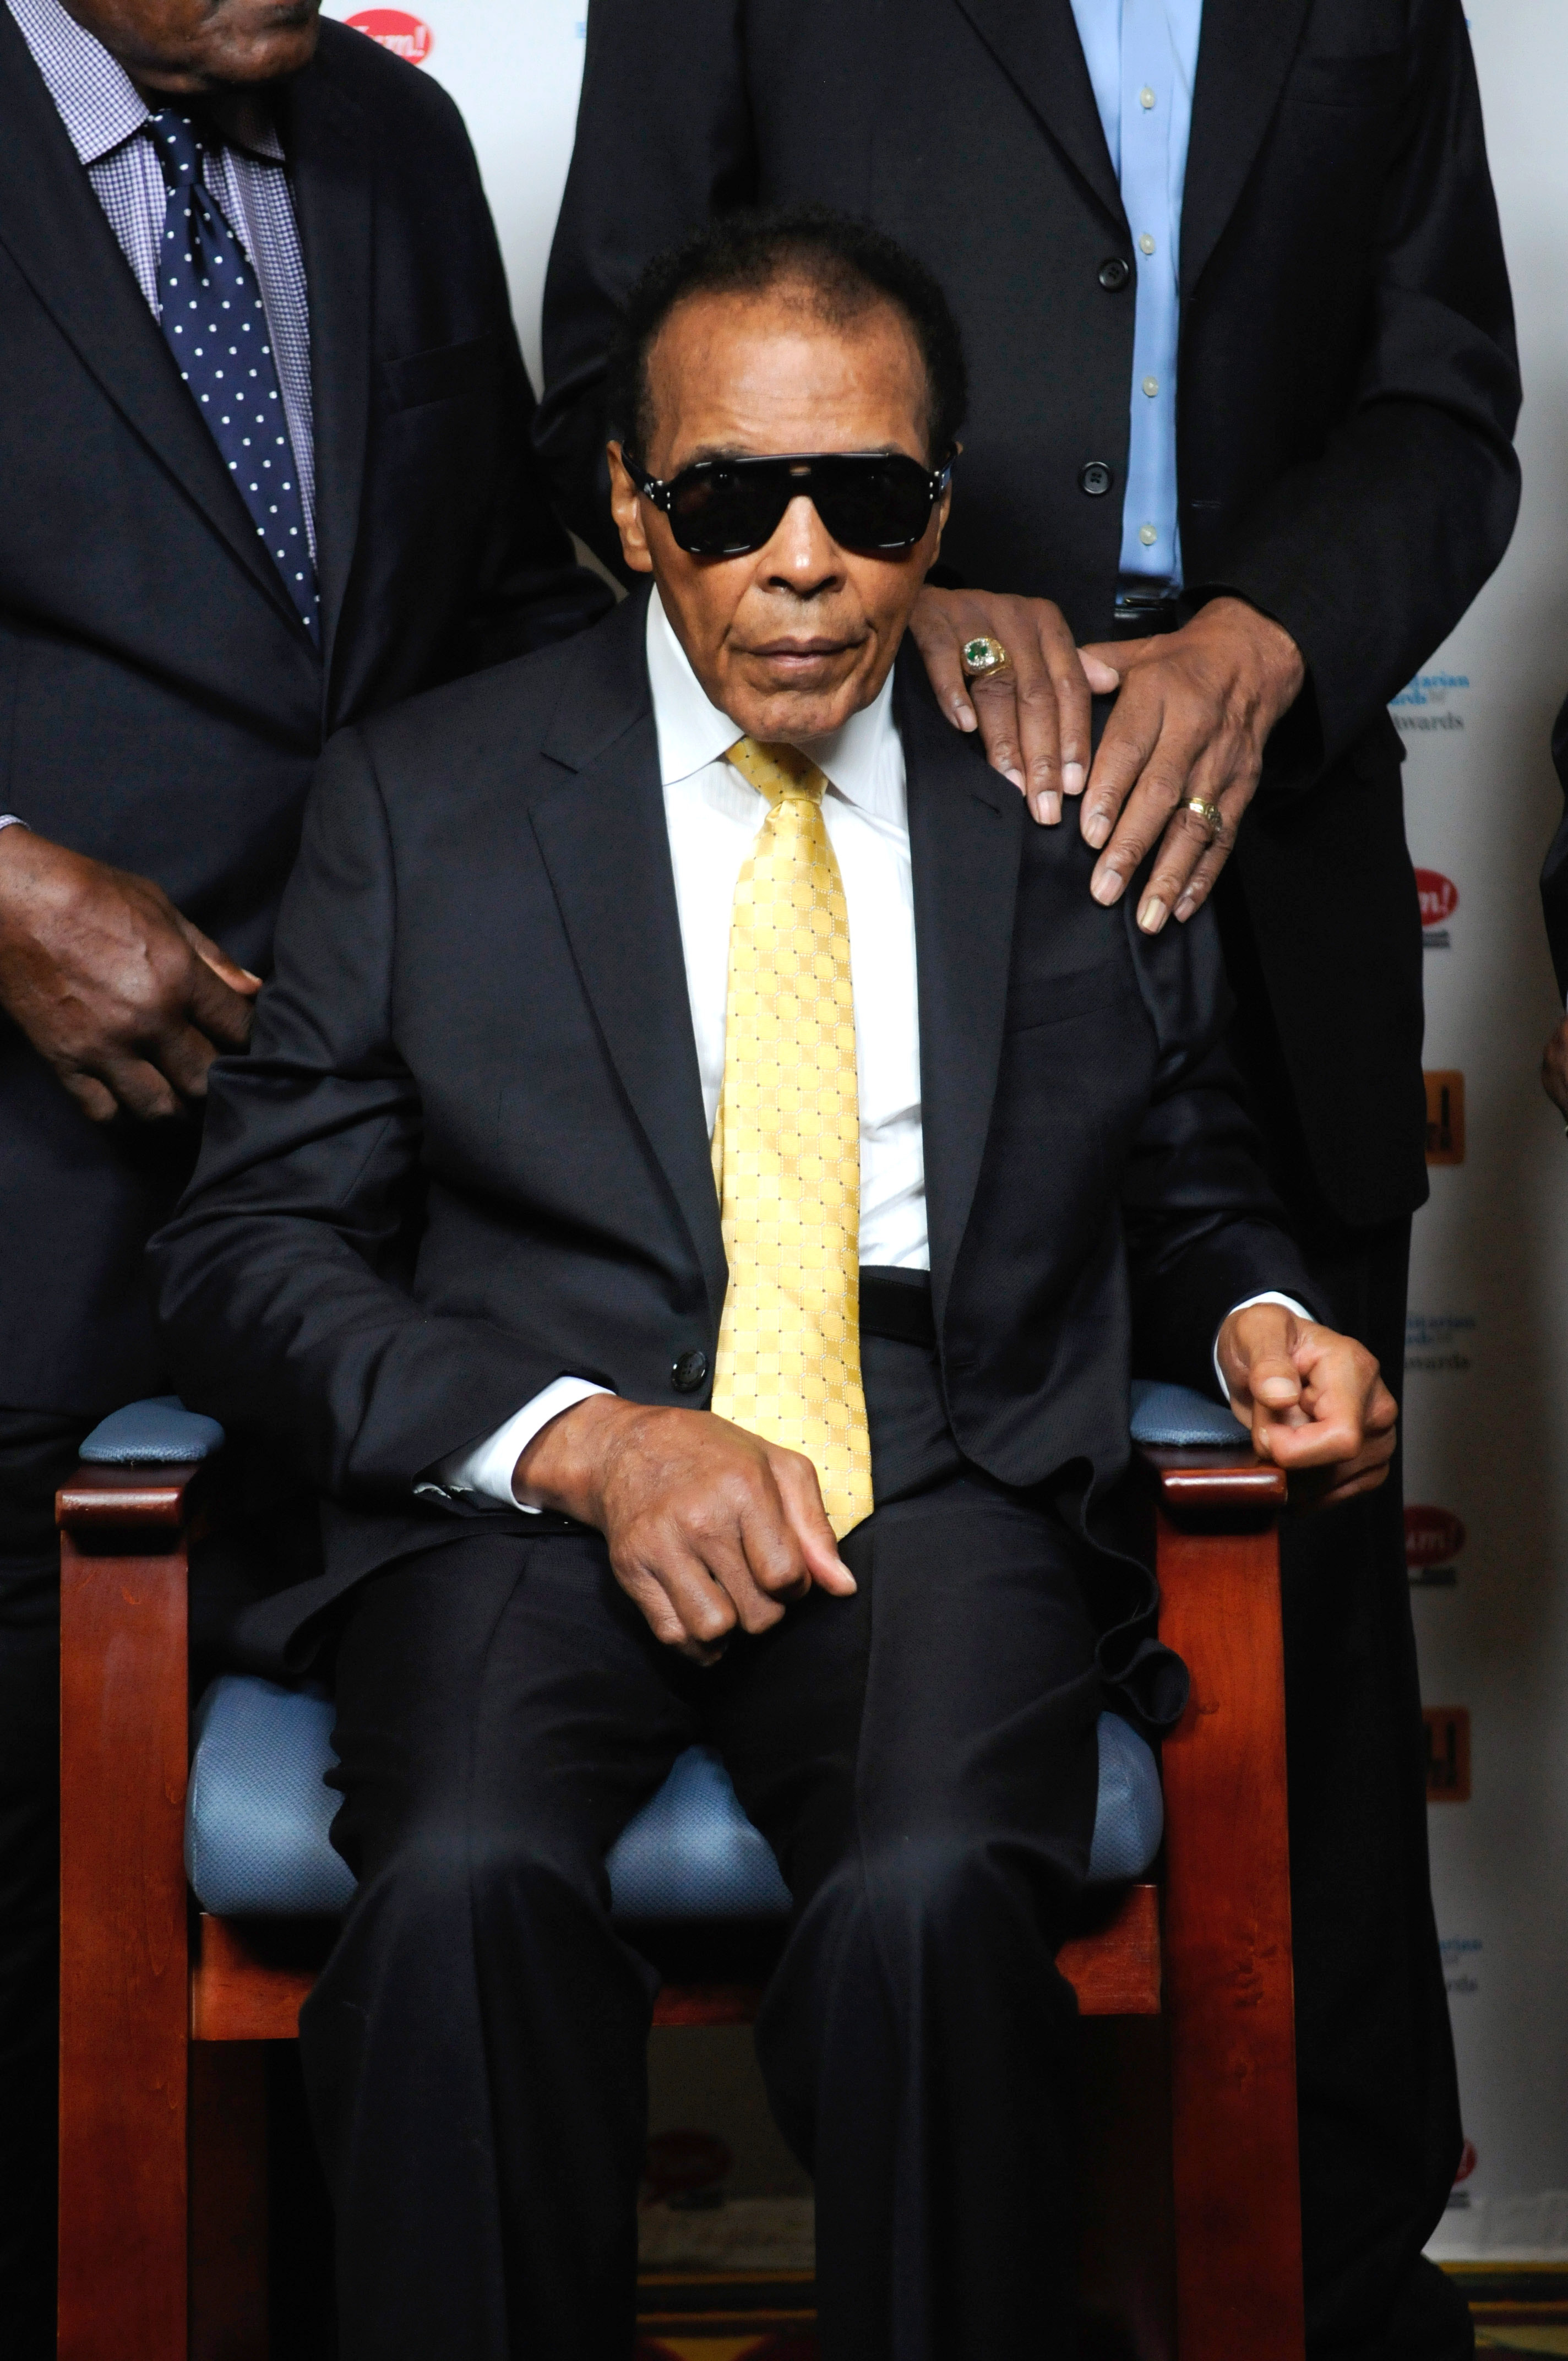 Muhammad Ali attends the 2014 Muhammad Ali Humanitarian Awards at the Louisville Marriott Downtown on Sept. 27, 2014 in Louisville. (Stephen J. Cohen—Getty Images)